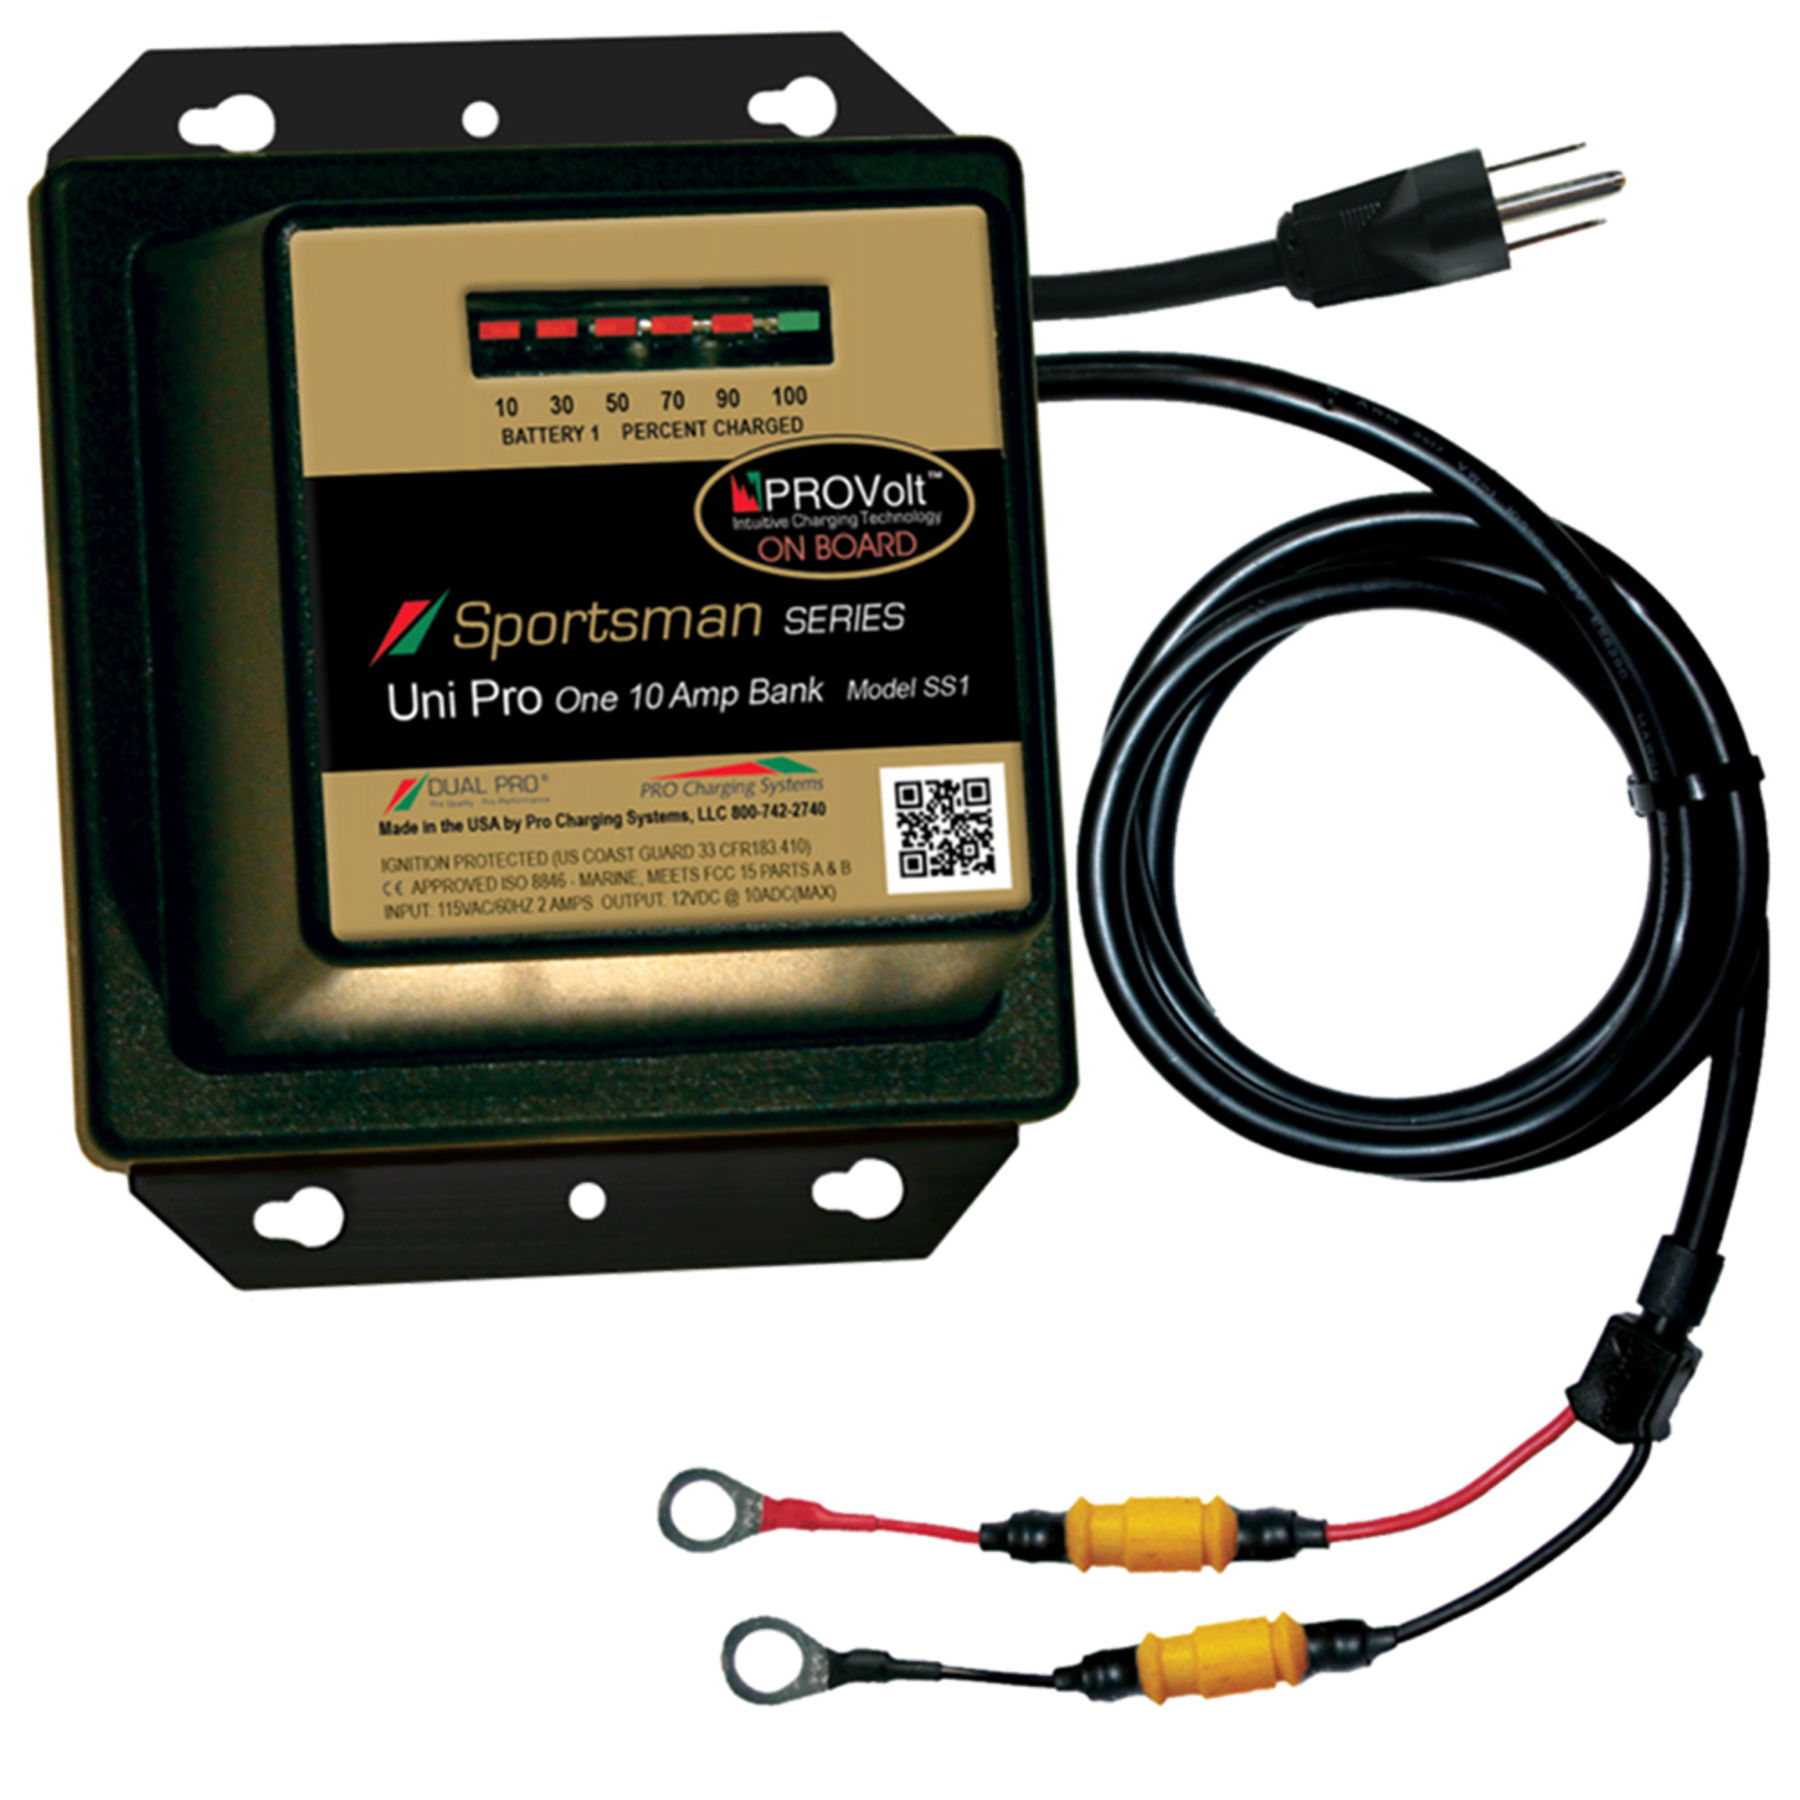 Dual Pro SS1 | Sportsman Series 12v Uni Pro One 10 Amp Bank Marine Charger by Pro Charging Systems